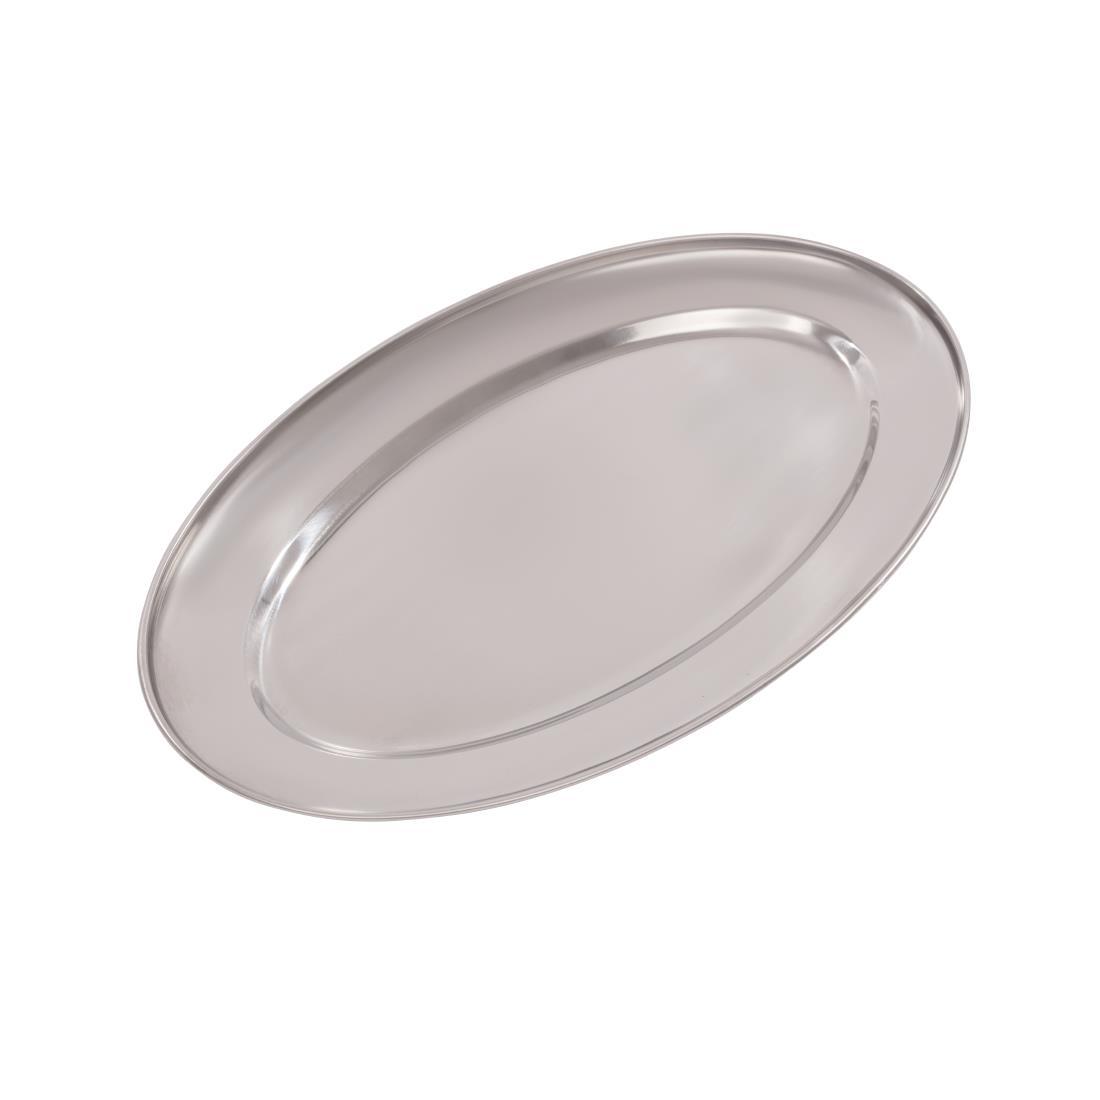 Olympia Stainless Steel Oval Serving Tray 350mm - K364  - 1